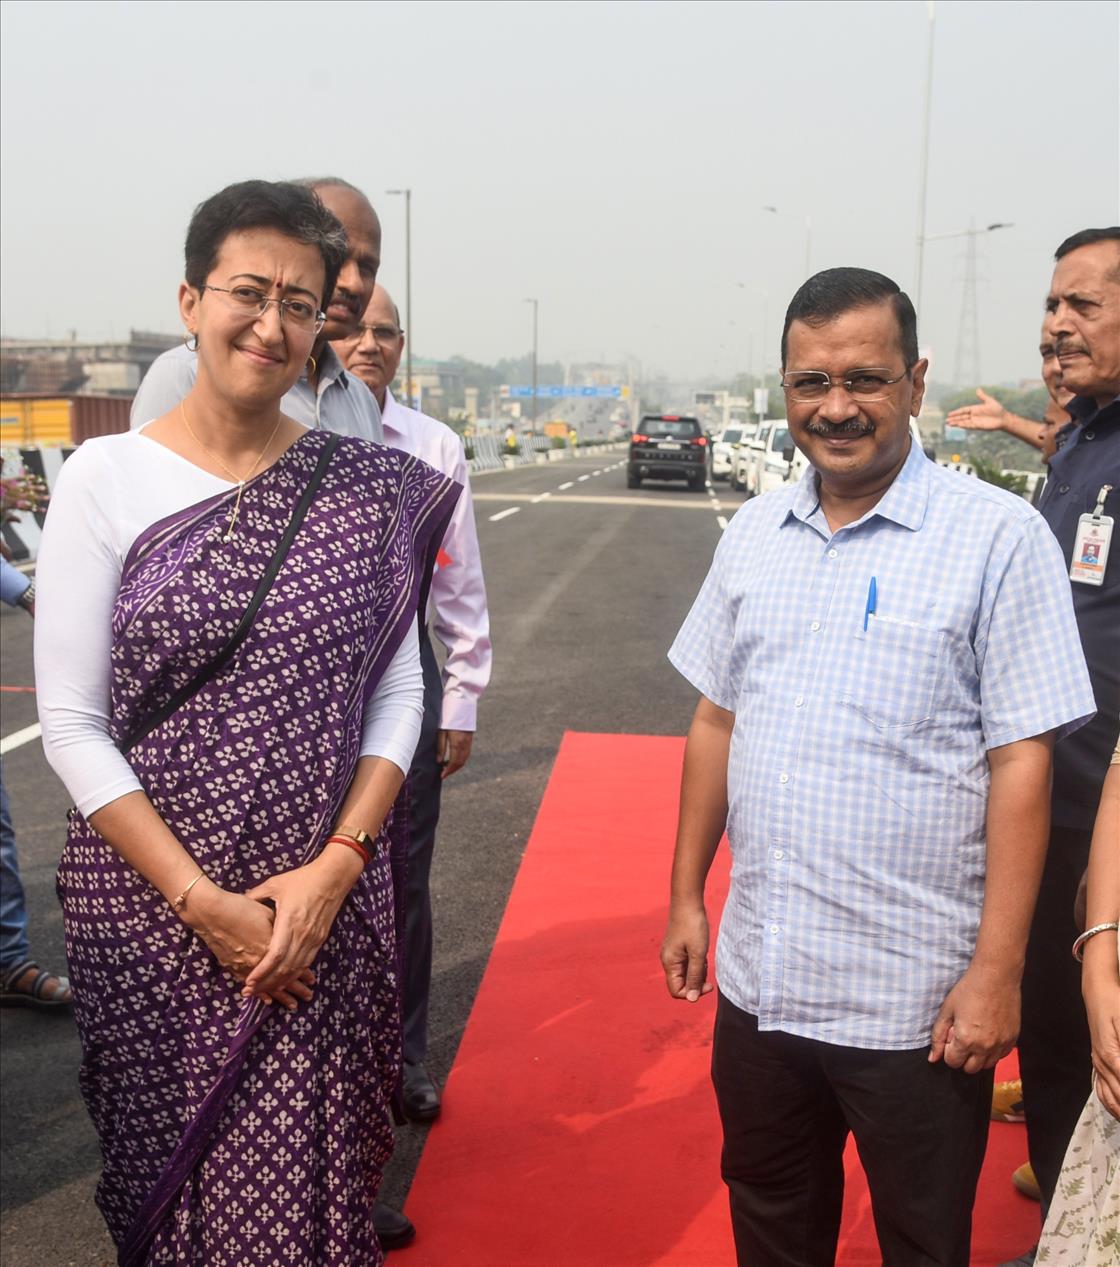 Delhi Cabinet Rejig: Atishi Gets Law And Justice, Gehlot Given Women And Child Development